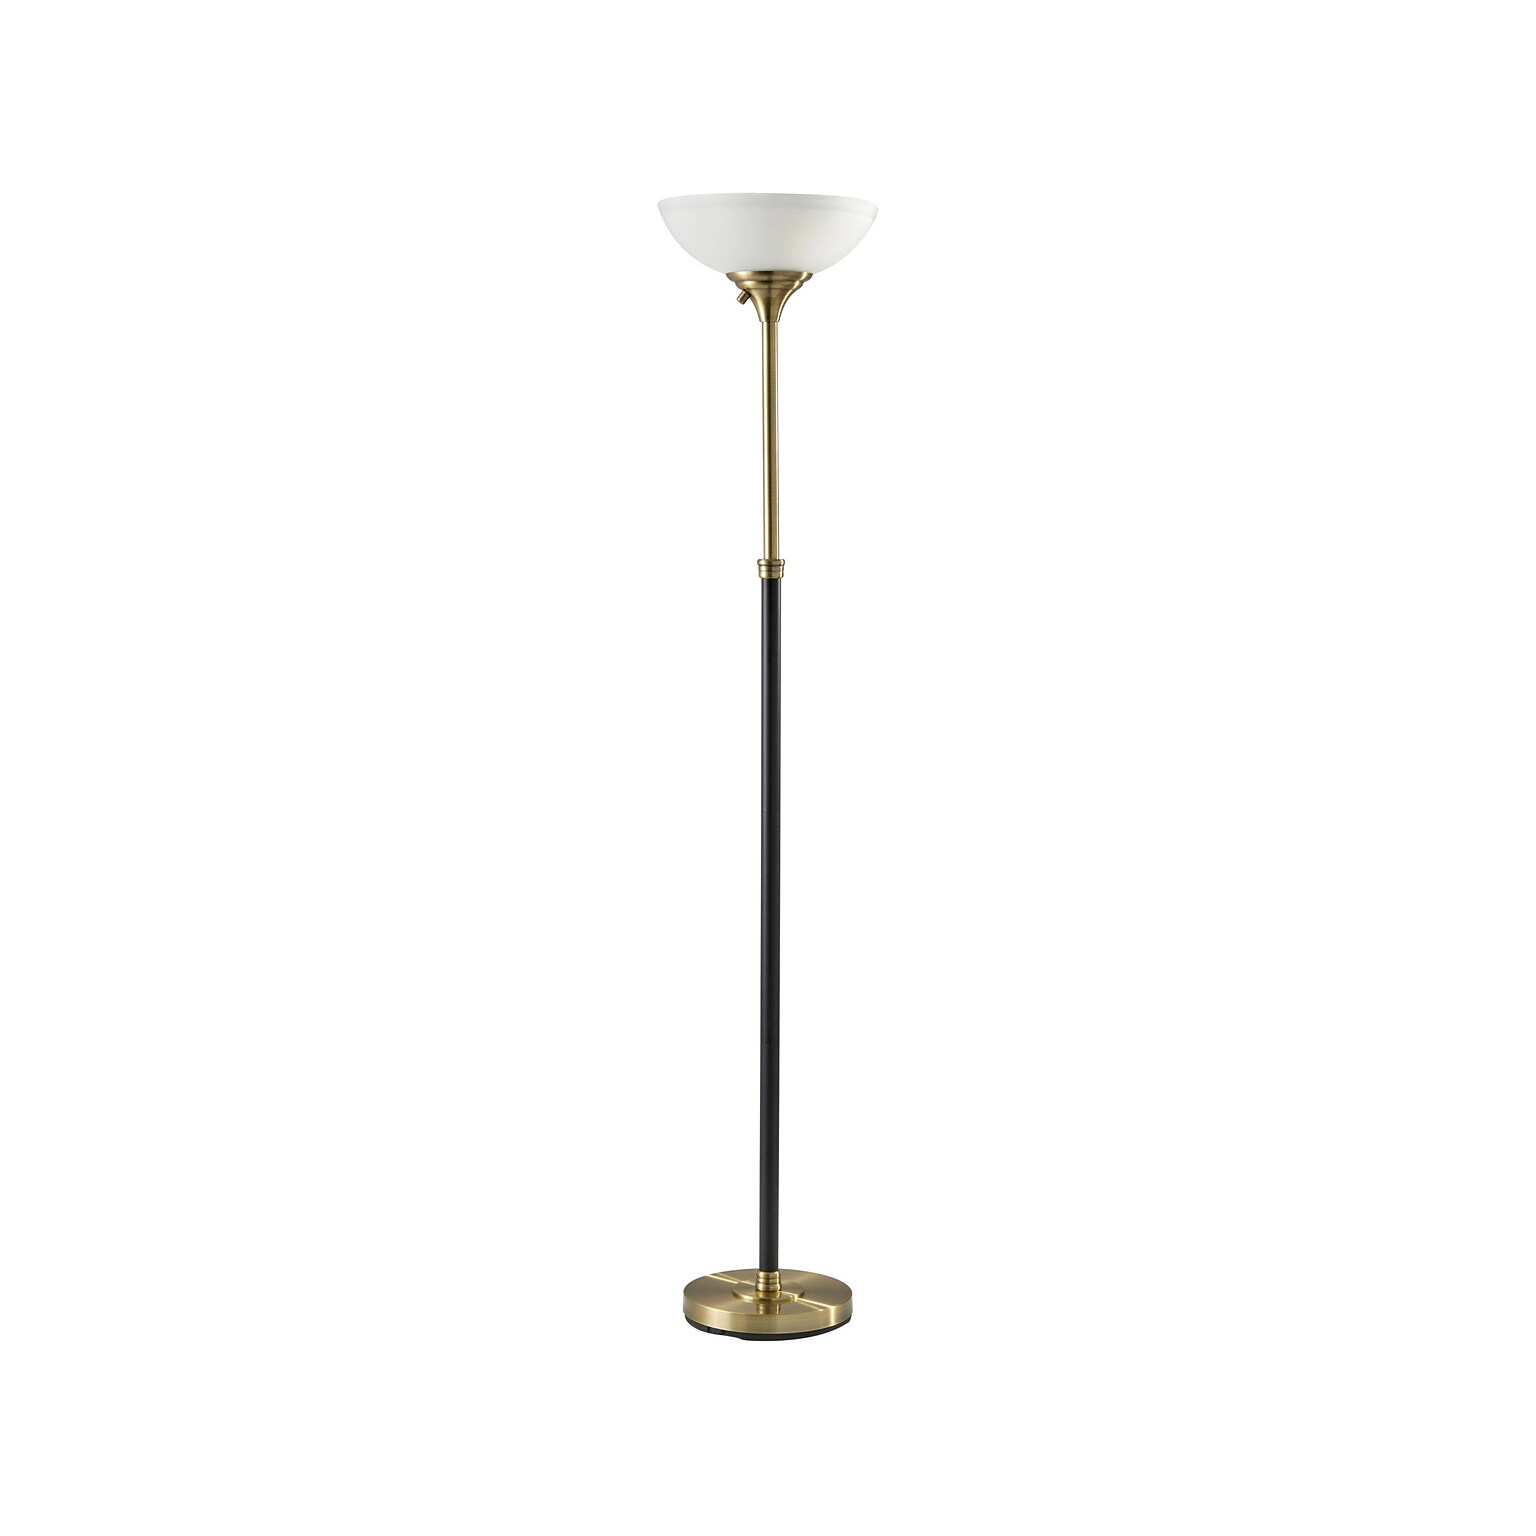 Adesso Bergen 71 Antique Brass/Black Floor Lamp with Dome Shade (4208-21)